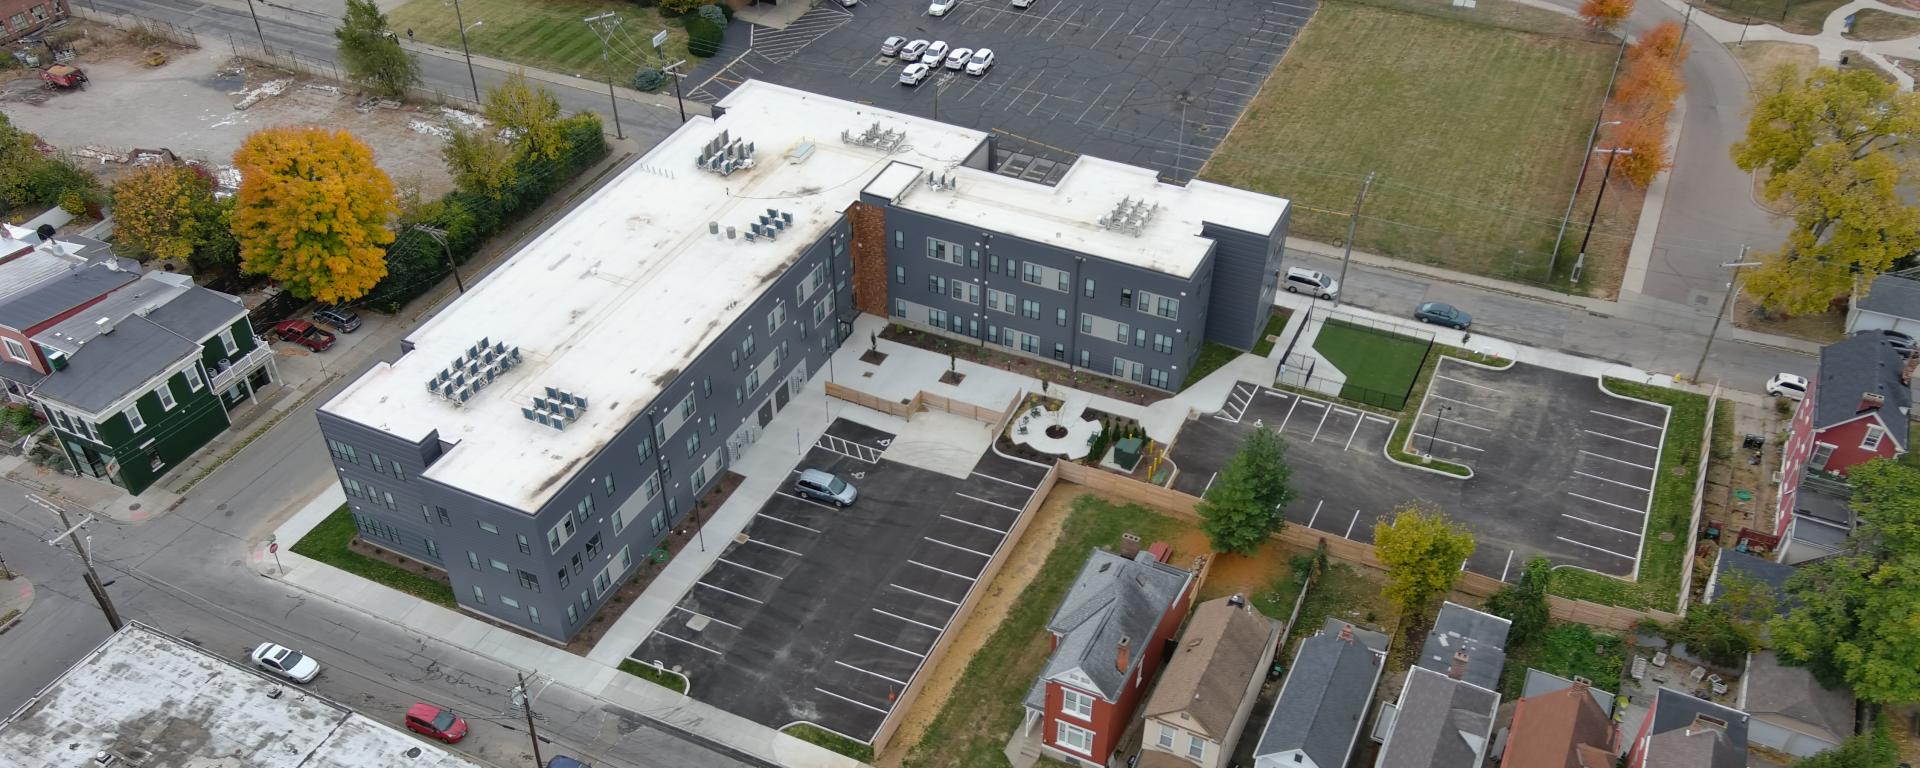 Aerial photo of a gray apartment building in urban neighborhood